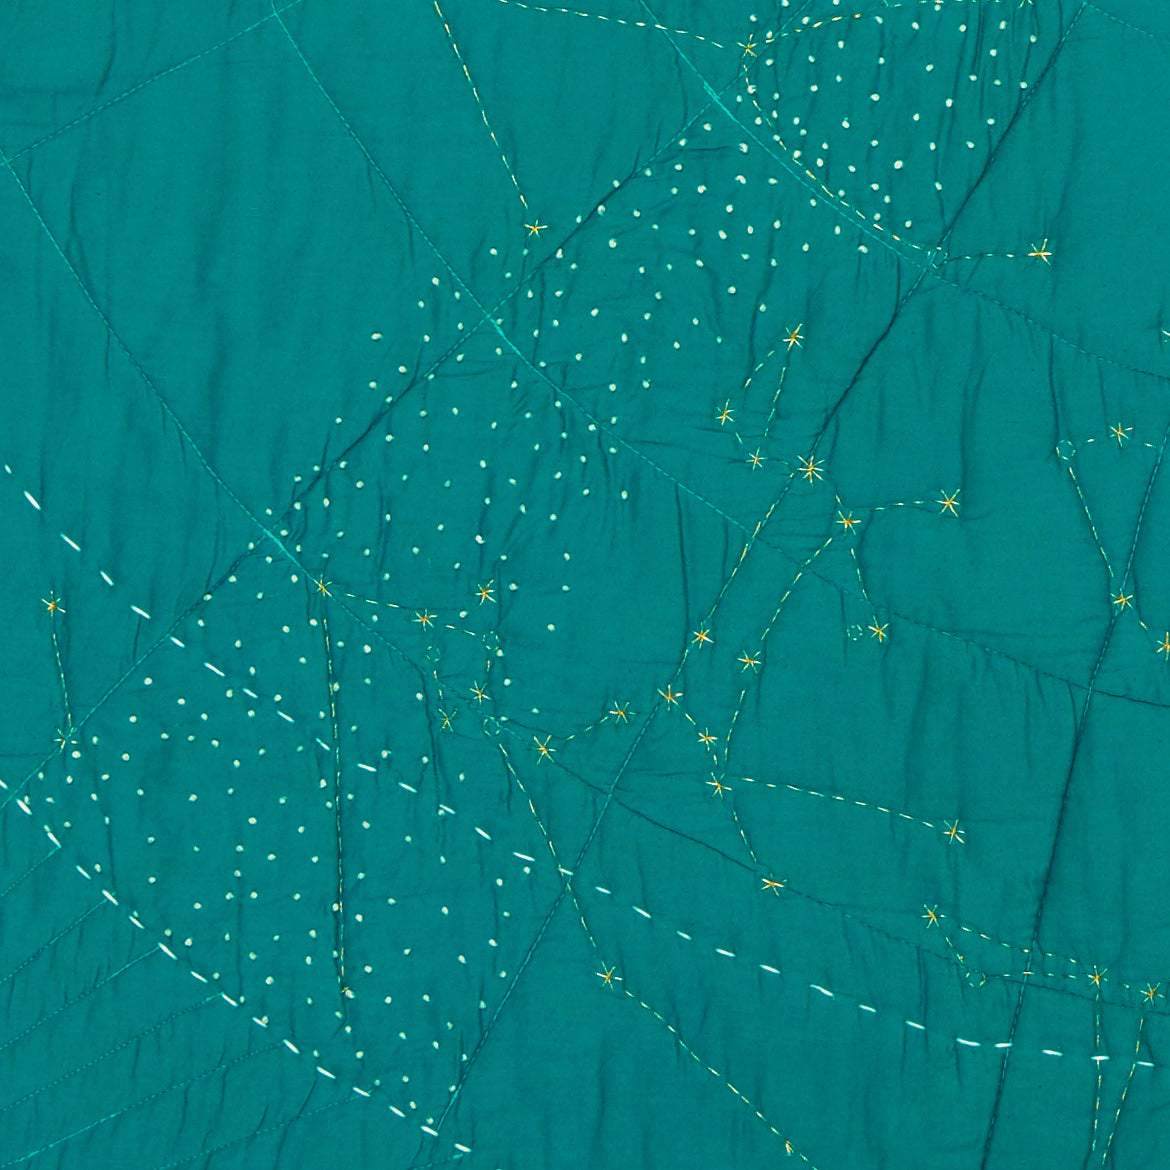 Limited Edition Teal Baby Constellation Quilt